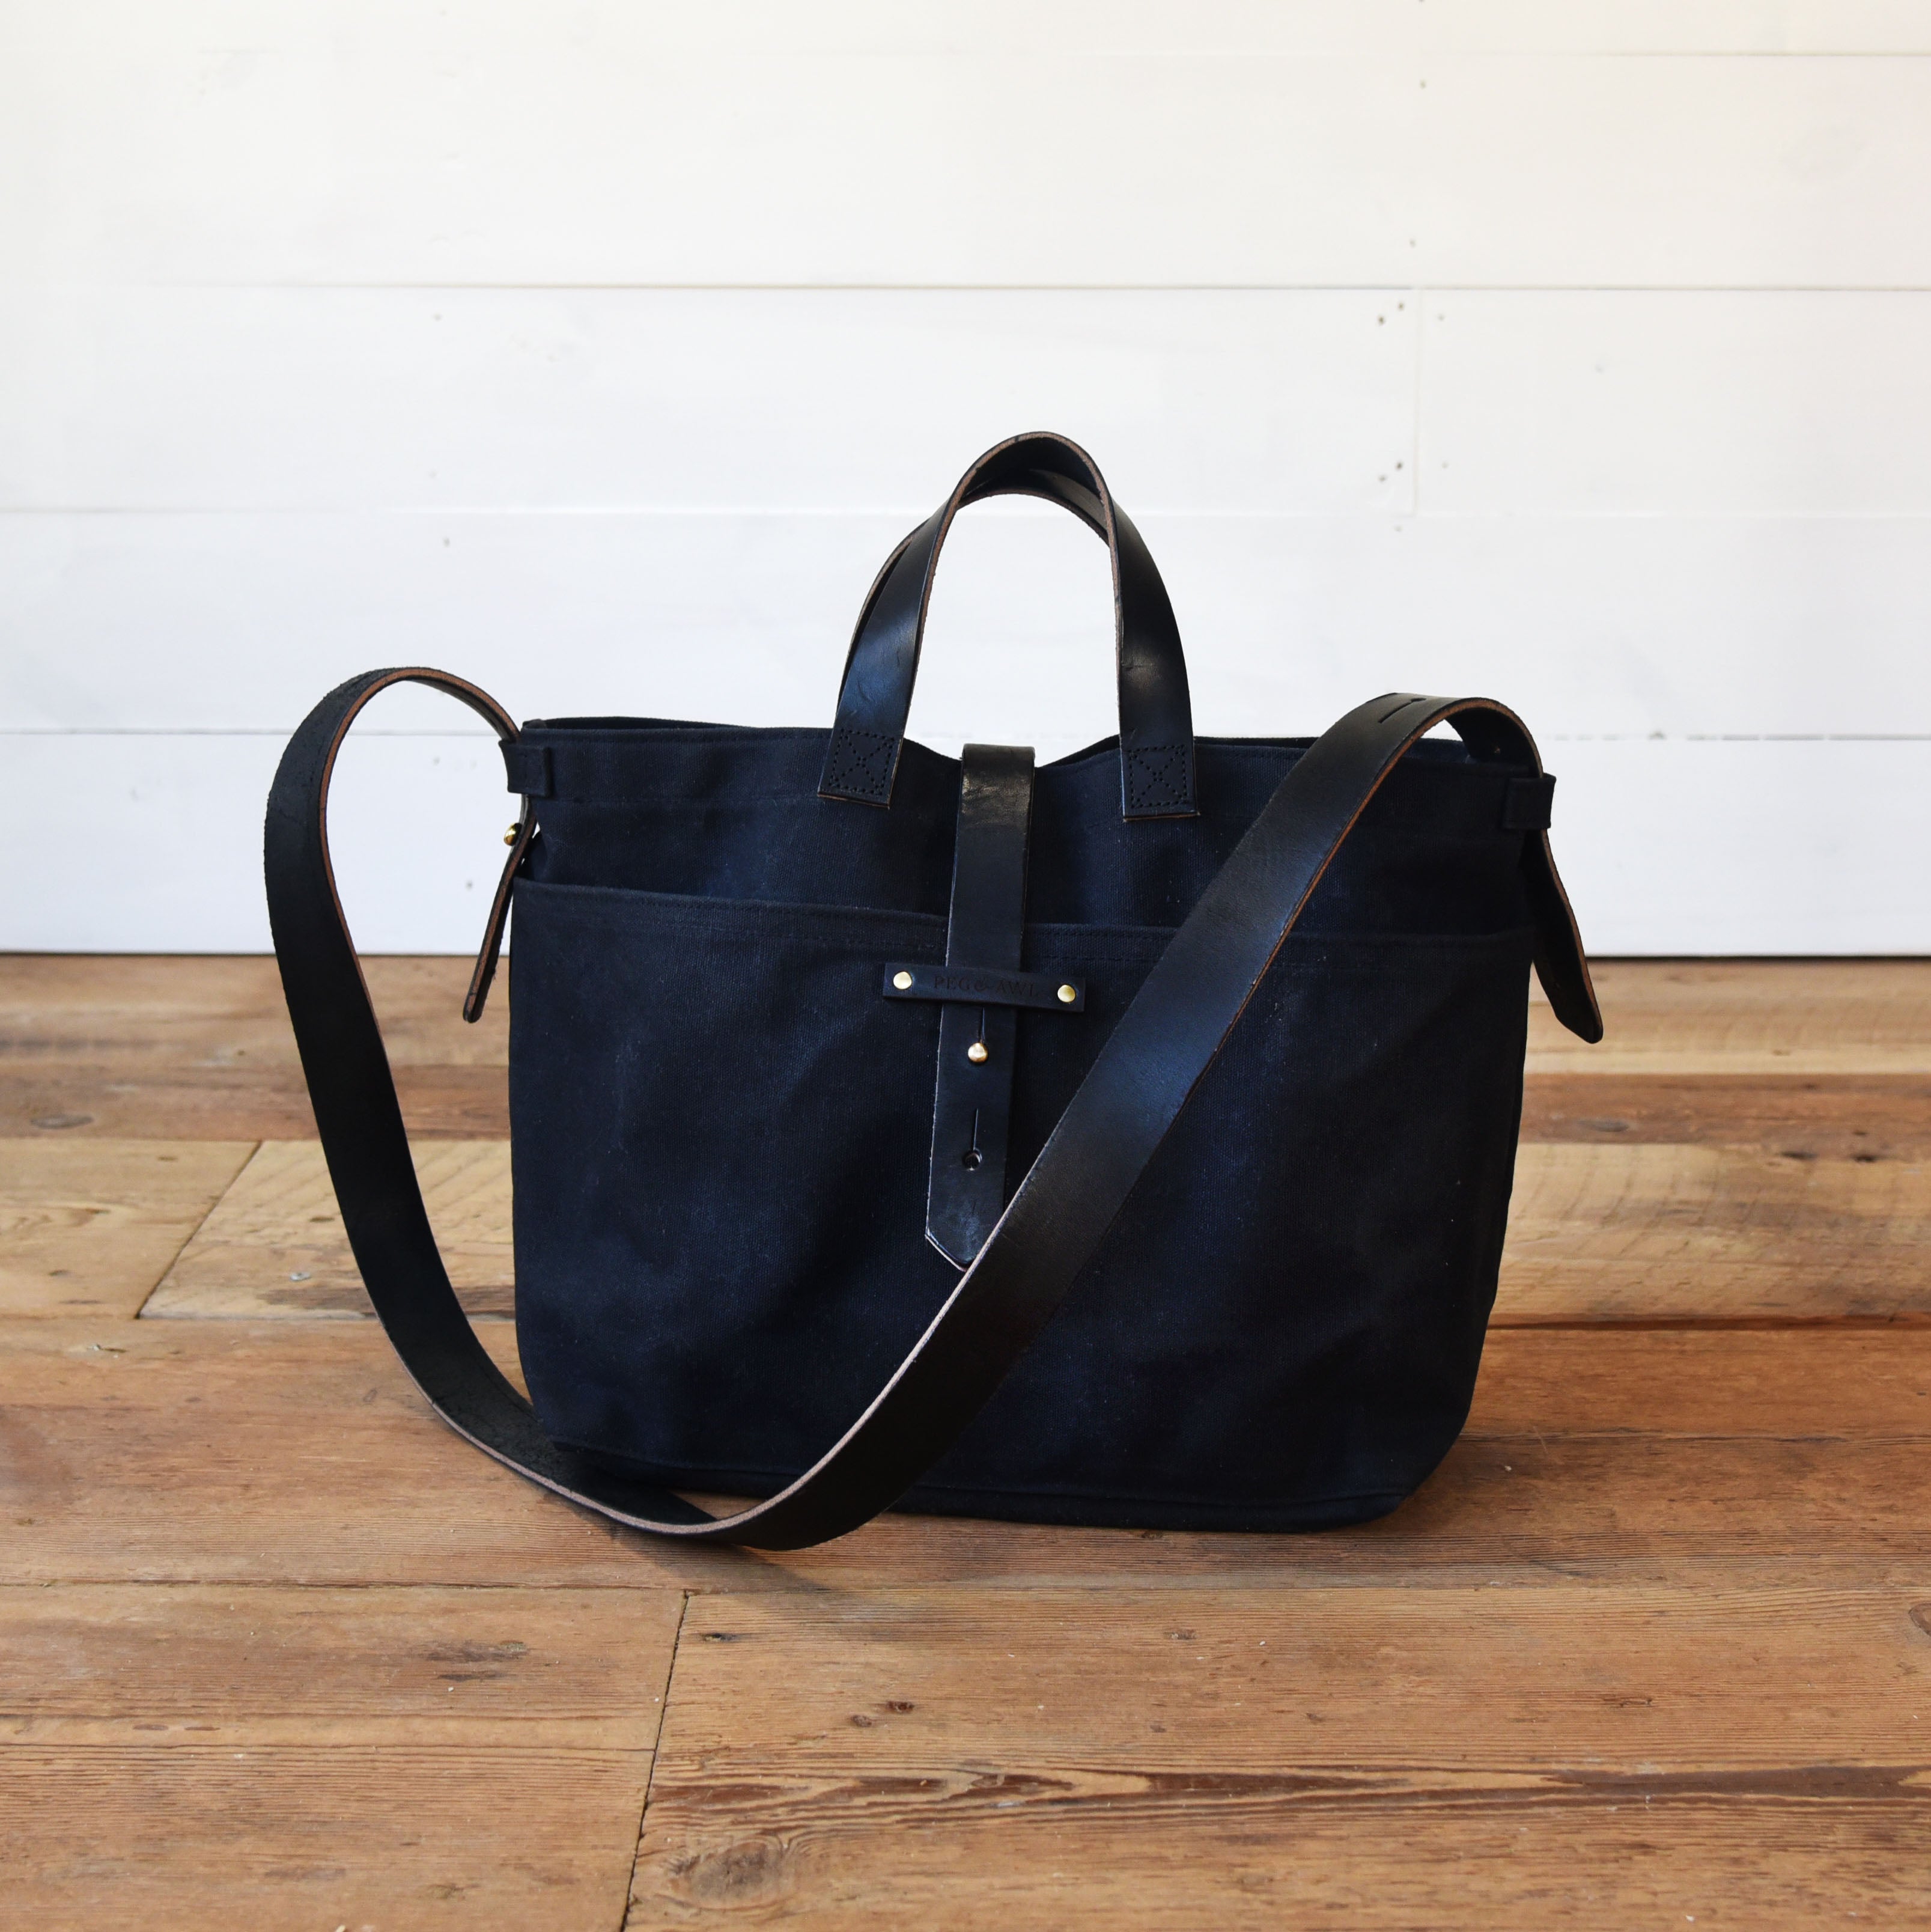 Waxed Canvas Tote without Zipper – Peg and Awl